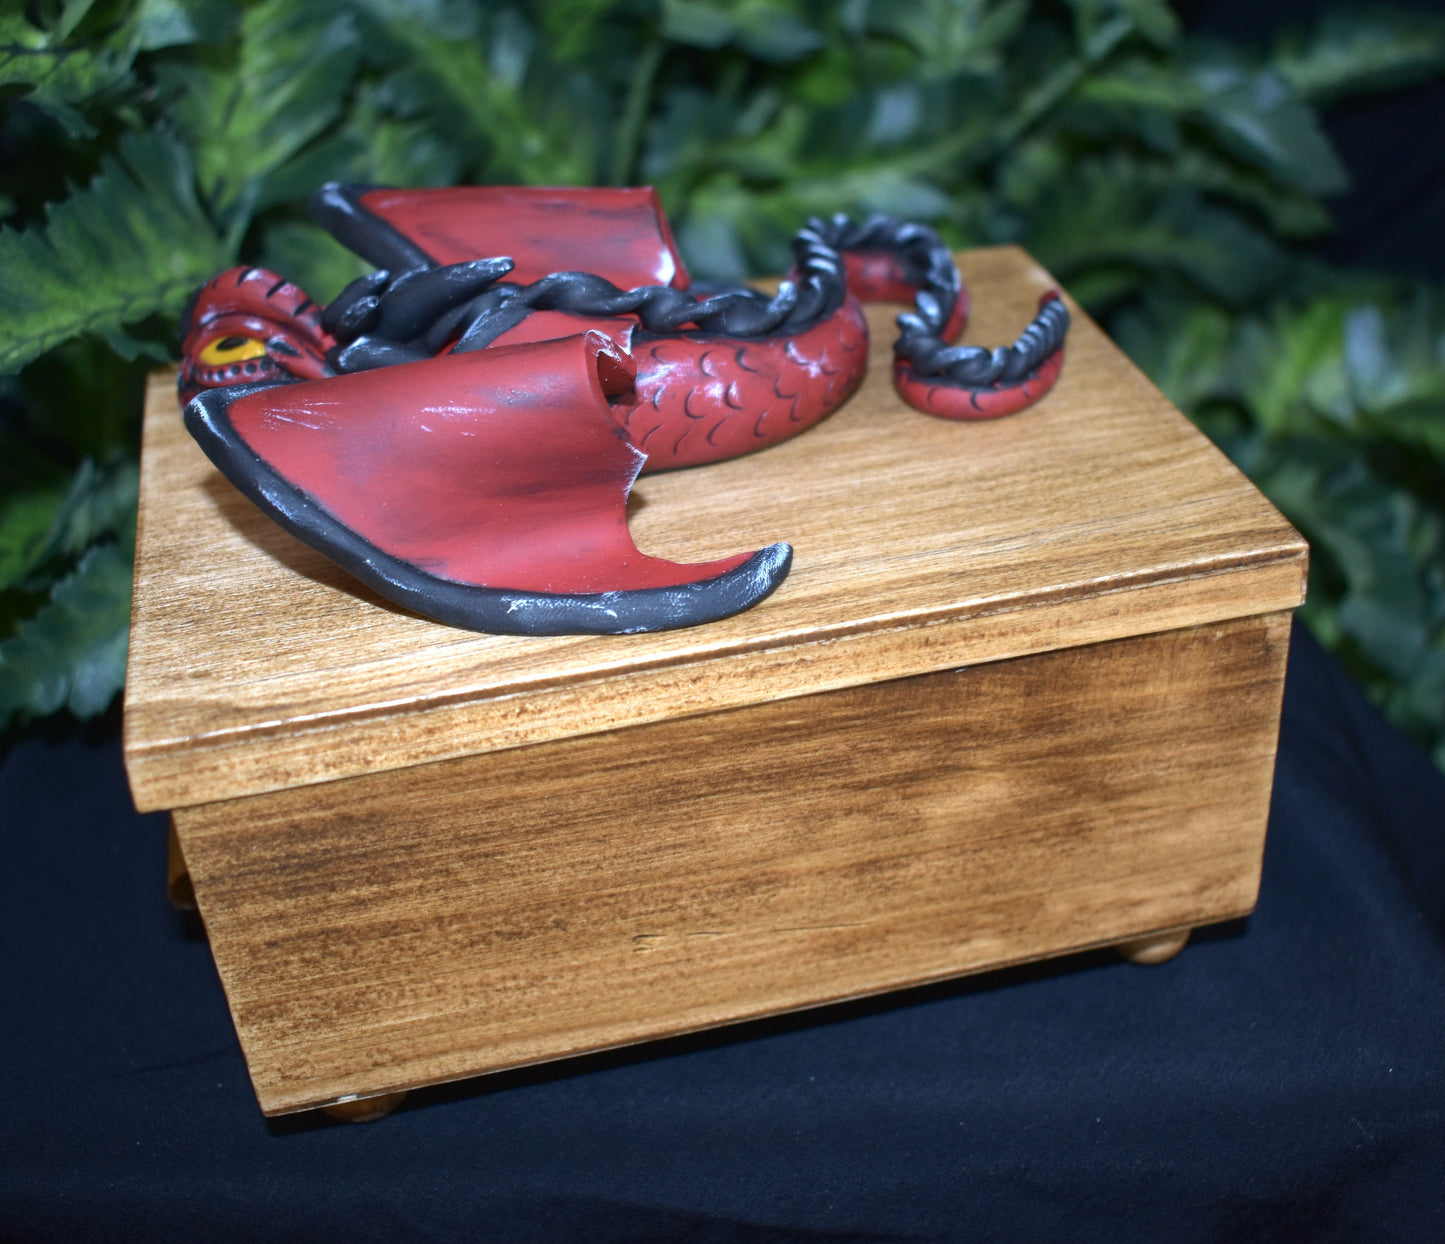 Polymer Clay Black and Red Dragon on Wood Jewelry Box - 1-103